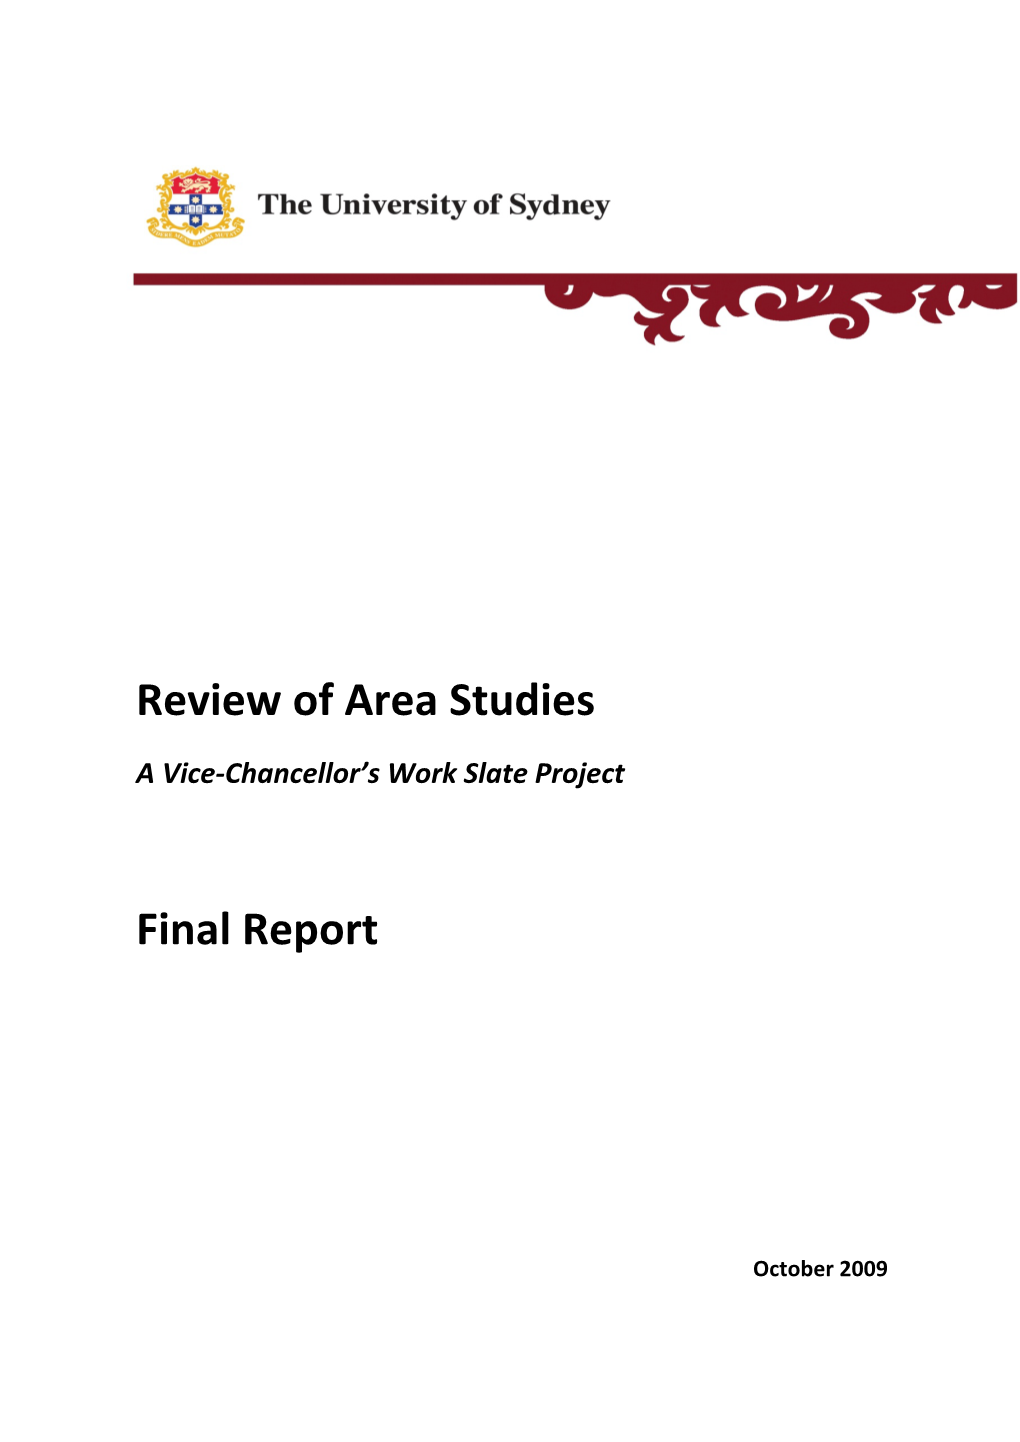 Review of Area Studies Final Report